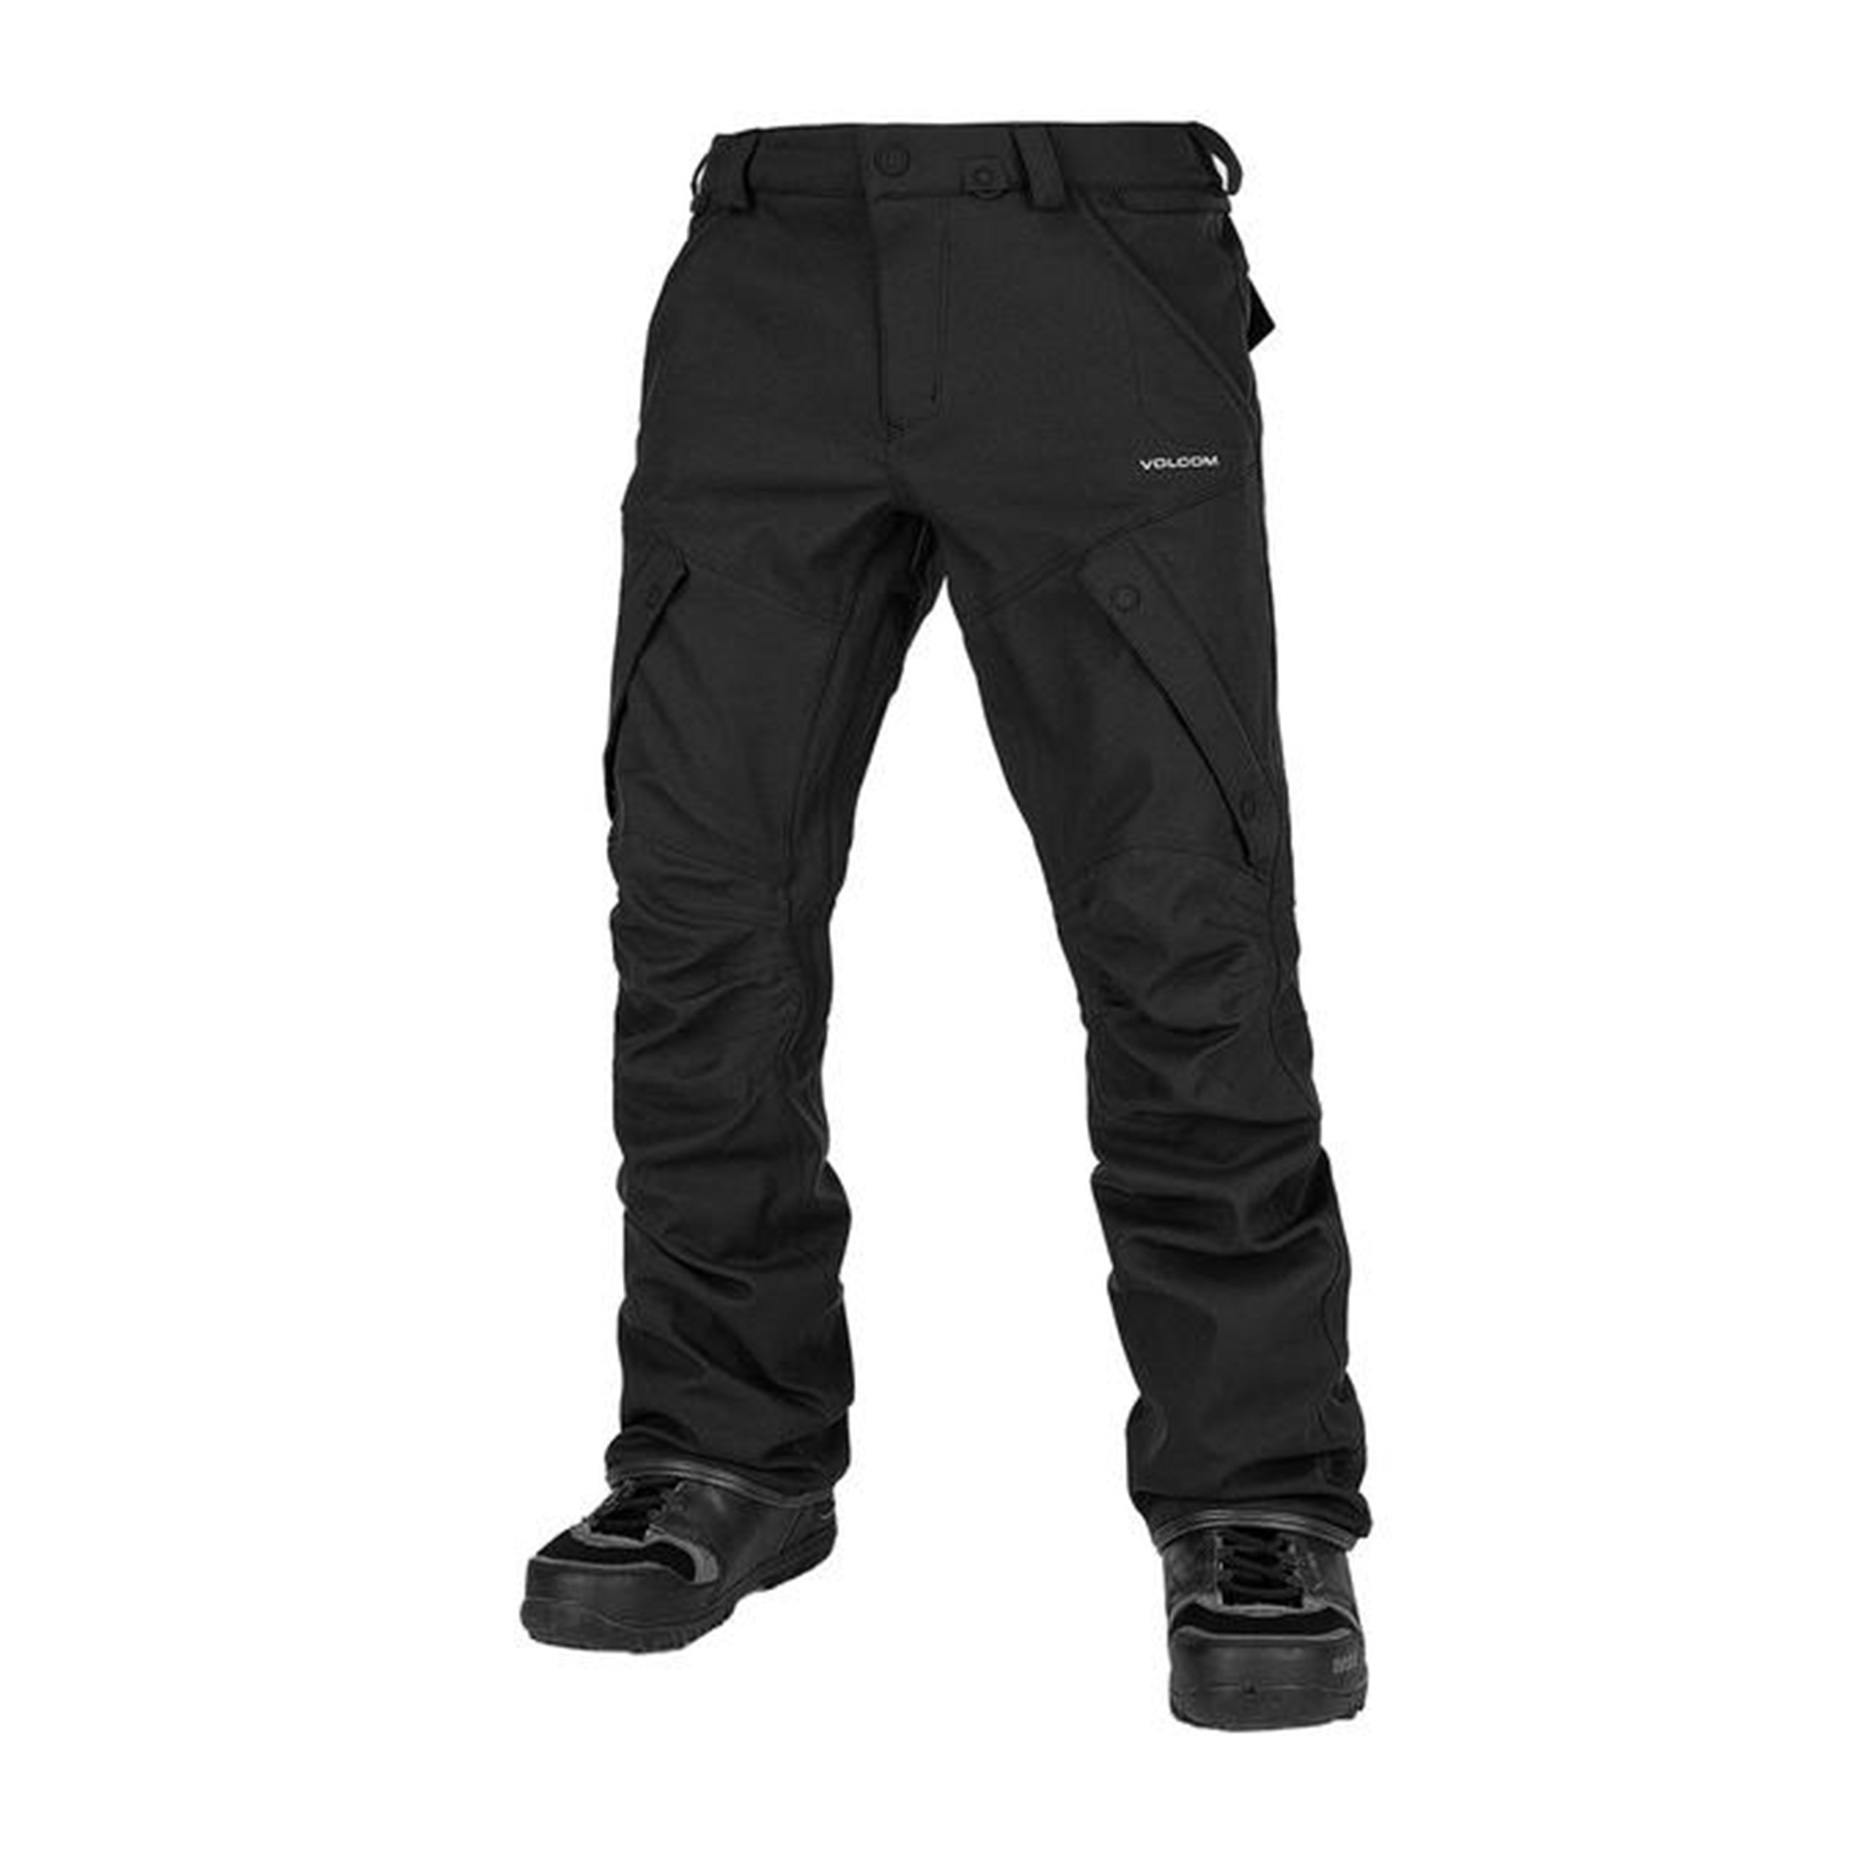 Volcom Articulated Snowboard Pant 2021 - Black | BOARDWORLD Store